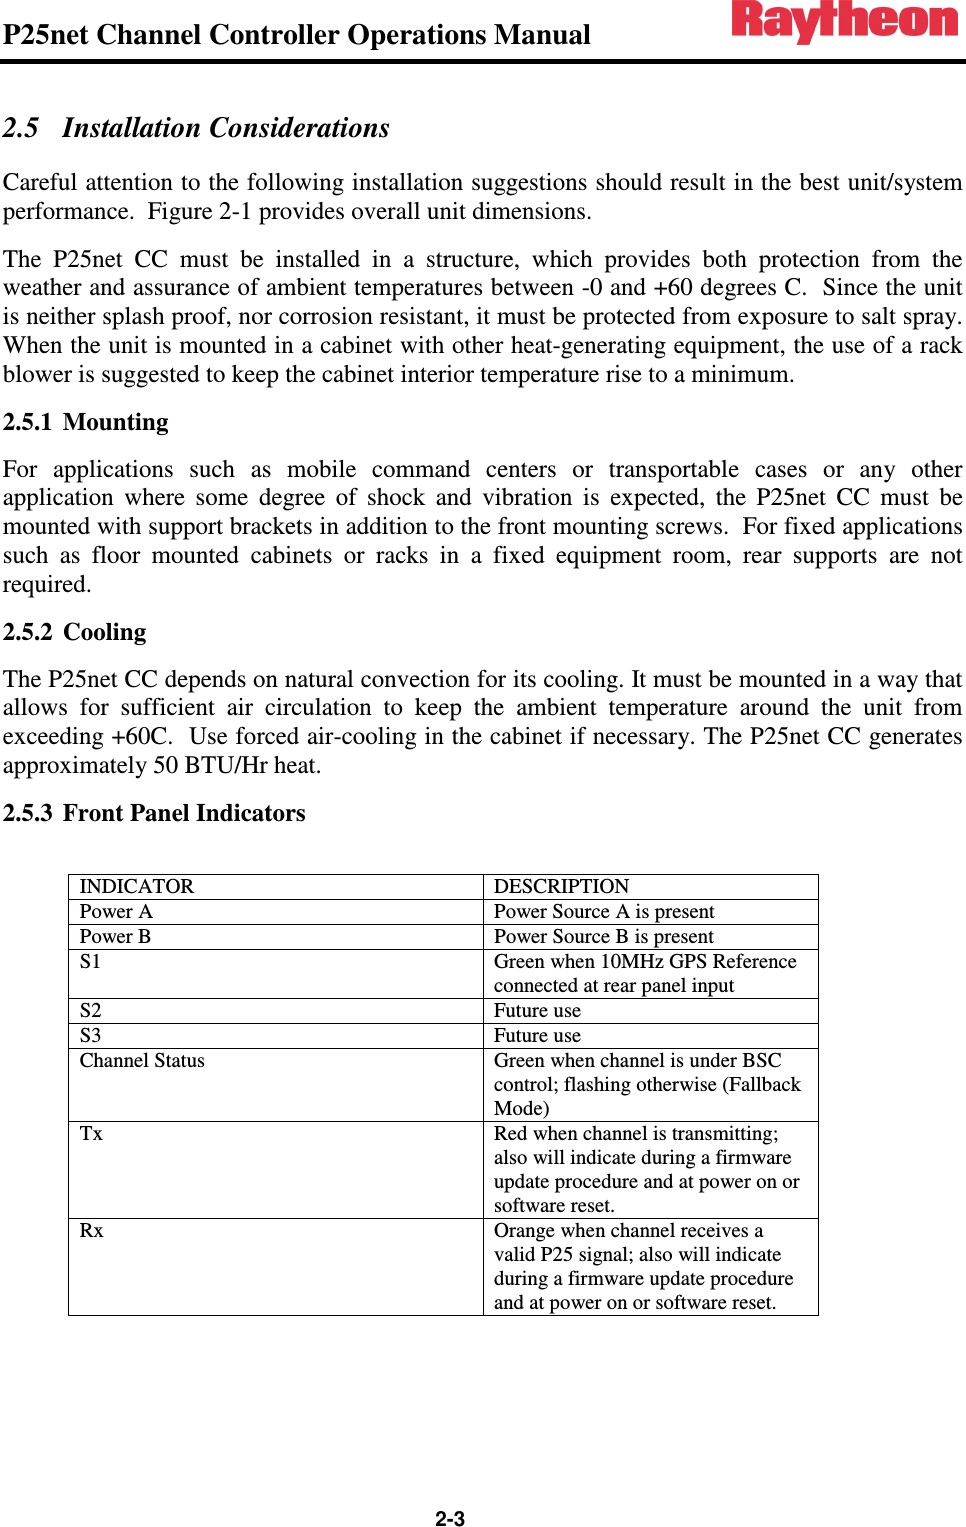 P25net Channel Controller Operations Manual                                                                                                   2-3 2.5 Installation Considerations Careful attention to the following installation suggestions should result in the best unit/system performance.  Figure 2-1 provides overall unit dimensions. The  P25net  CC  must  be  installed  in  a  structure,  which  provides  both  protection  from  the weather and assurance of ambient temperatures between -0 and +60 degrees C.  Since the unit is neither splash proof, nor corrosion resistant, it must be protected from exposure to salt spray.  When the unit is mounted in a cabinet with other heat-generating equipment, the use of a rack blower is suggested to keep the cabinet interior temperature rise to a minimum. 2.5.1 Mounting For  applications  such  as  mobile  command  centers  or  transportable  cases  or  any  other application  where  some  degree  of  shock  and  vibration  is  expected,  the  P25net  CC  must  be mounted with support brackets in addition to the front mounting screws.  For fixed applications such  as  floor  mounted  cabinets  or  racks  in  a  fixed  equipment  room,  rear  supports  are  not required. 2.5.2 Cooling The P25net CC depends on natural convection for its cooling. It must be mounted in a way that allows  for  sufficient  air  circulation  to  keep  the  ambient  temperature  around  the  unit  from exceeding +60C.  Use forced air-cooling in the cabinet if necessary. The P25net CC generates approximately 50 BTU/Hr heat. 2.5.3 Front Panel Indicators  INDICATOR  DESCRIPTION Power A  Power Source A is present Power B  Power Source B is present S1  Green when 10MHz GPS Reference connected at rear panel input S2  Future use S3  Future use Channel Status  Green when channel is under BSC control; flashing otherwise (Fallback Mode) Tx  Red when channel is transmitting; also will indicate during a firmware update procedure and at power on or software reset. Rx  Orange when channel receives a valid P25 signal; also will indicate during a firmware update procedure and at power on or software reset.   